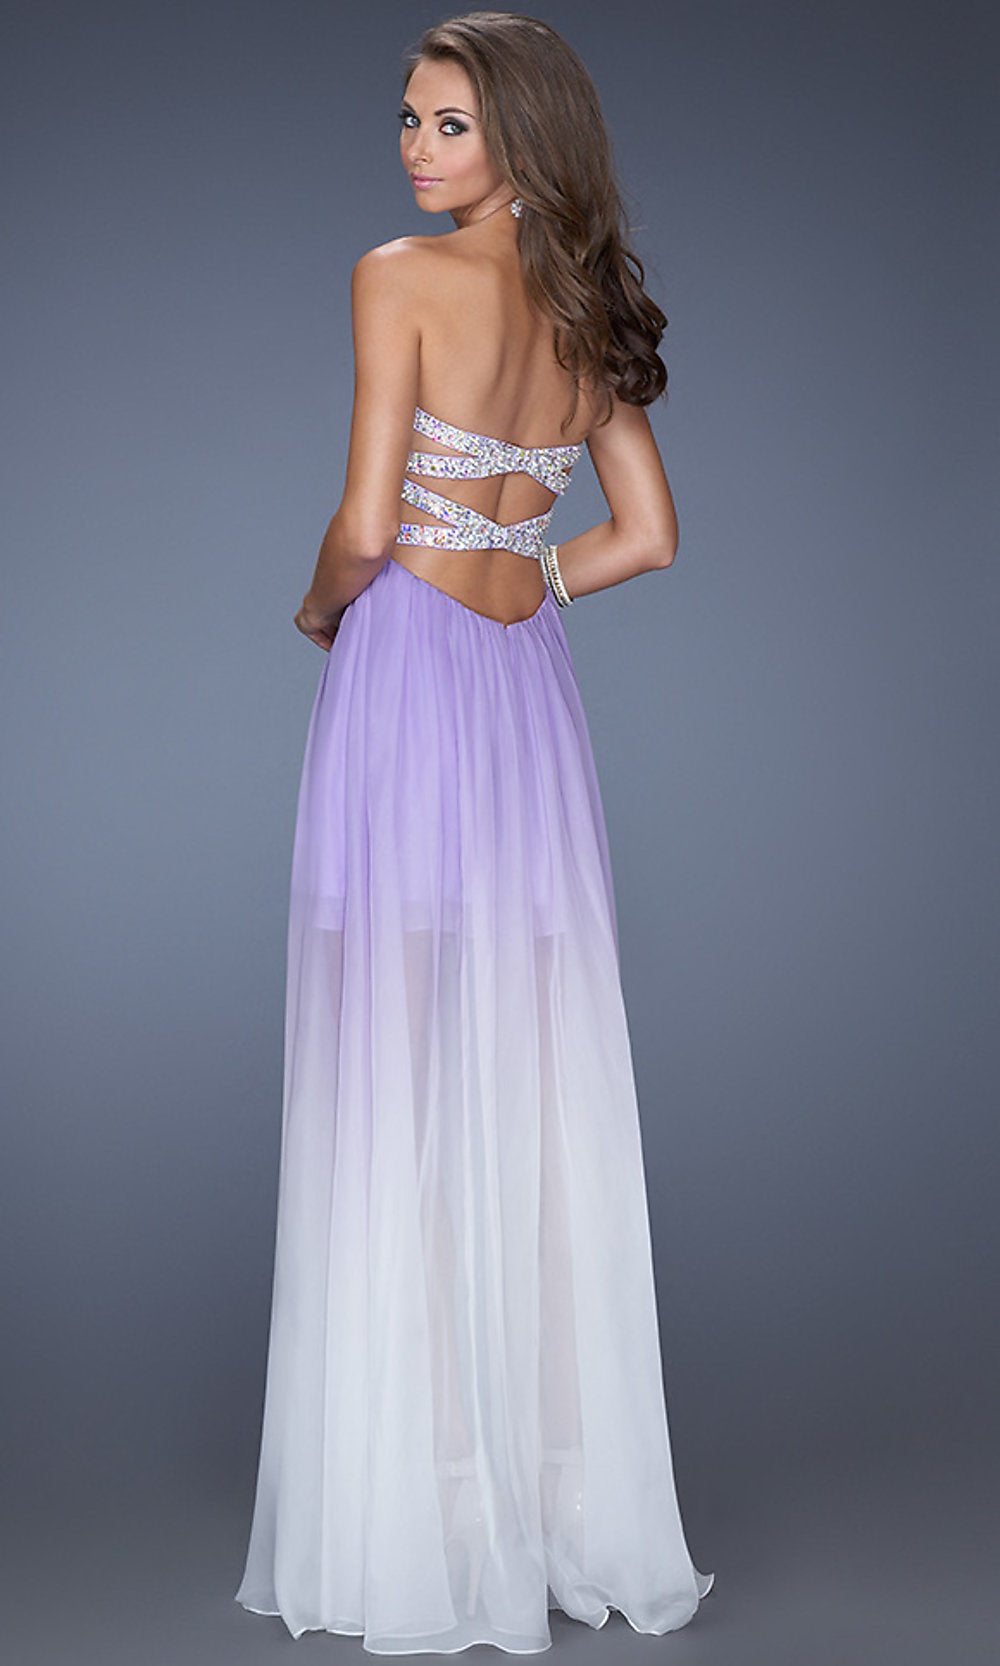 La Femme Strapless Ombre High-Low Prom Dress -PromGirl